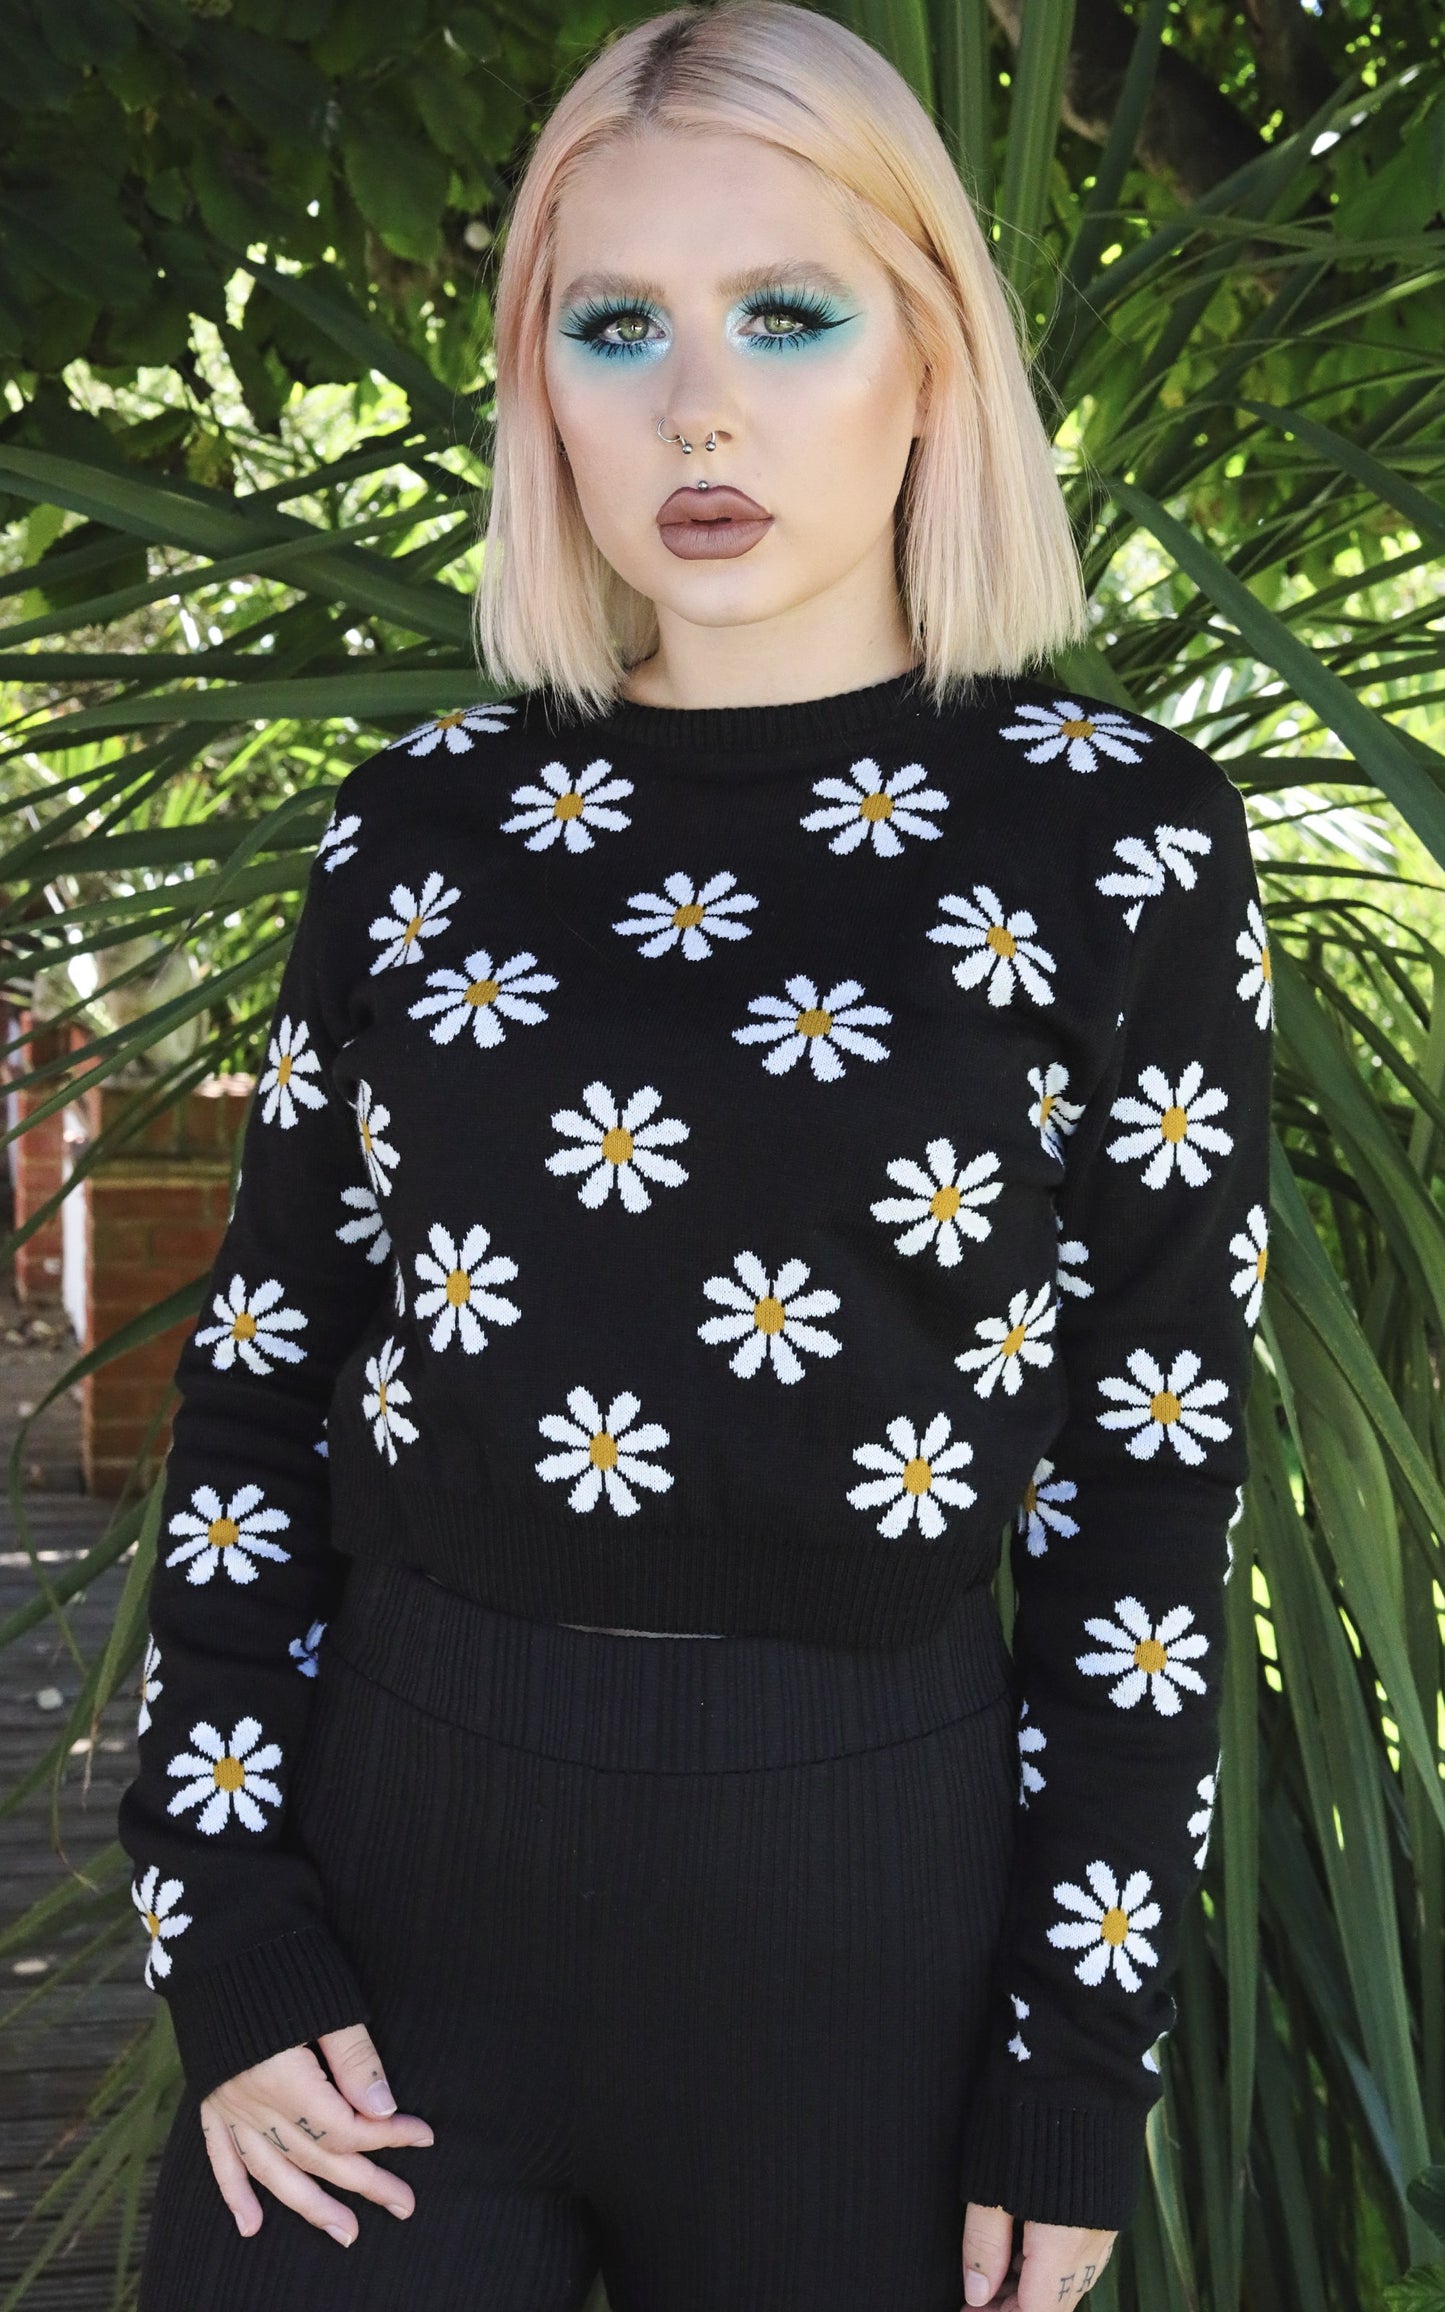 Daisy Chain Black Cropped Jumper